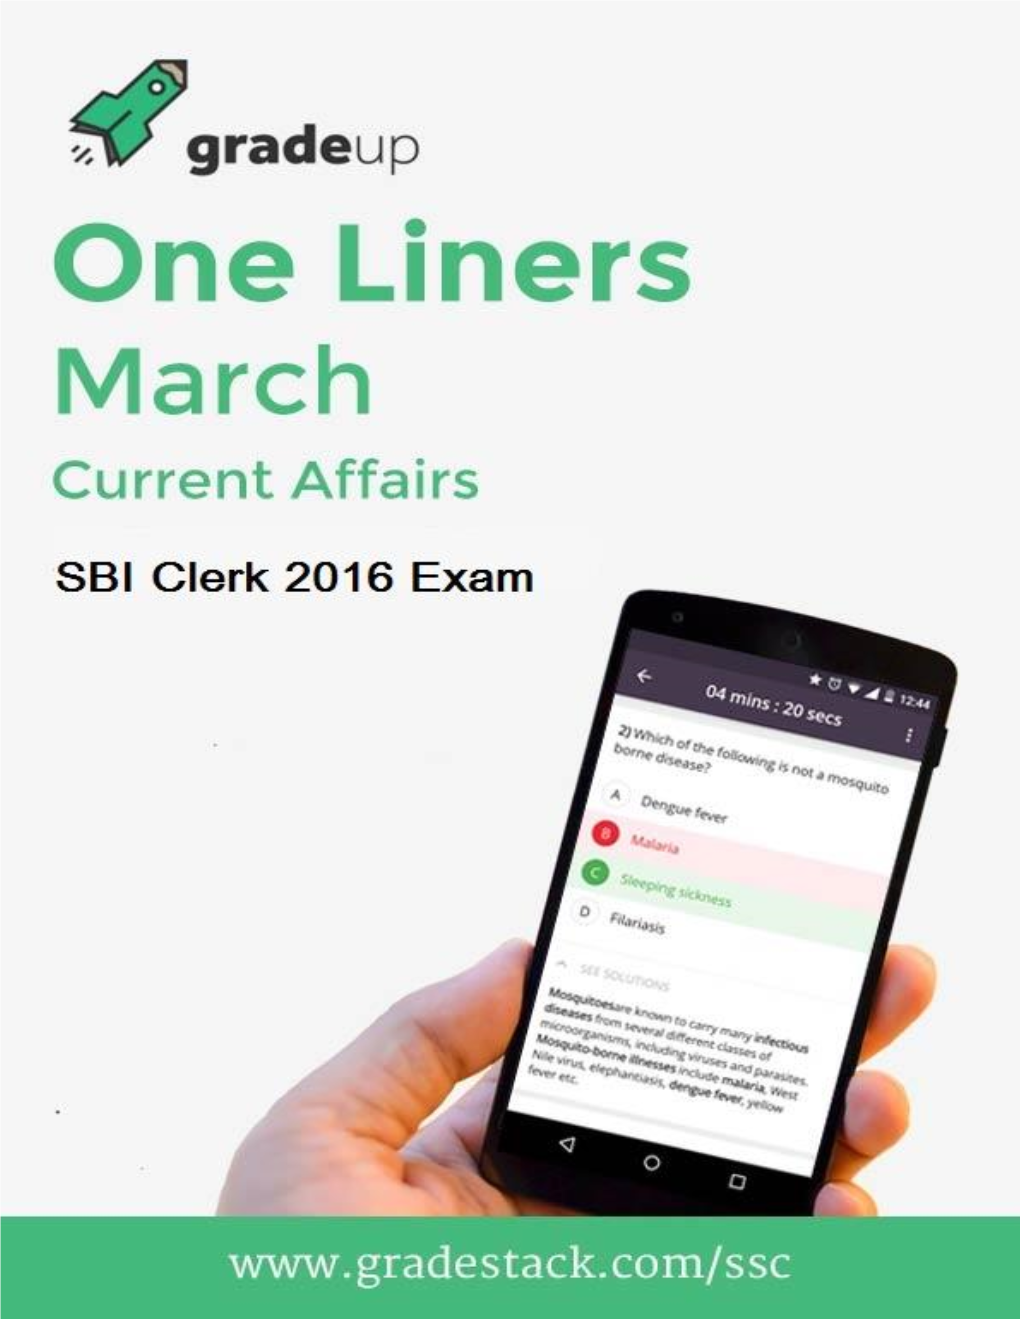 One Liner Updates March 2016